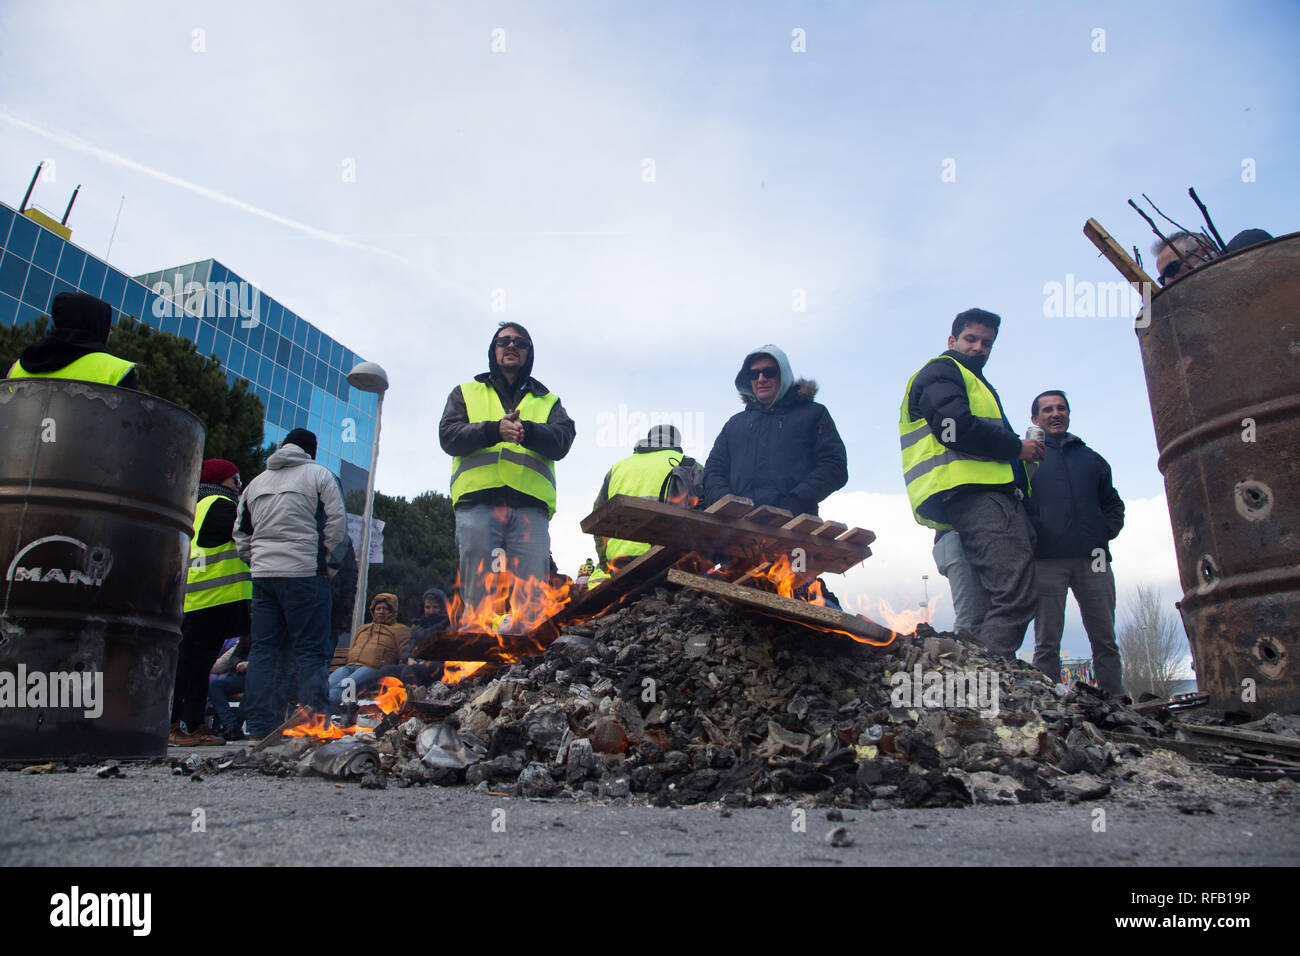 Madrid, Spain. 24th January, 2019. Yellow vests protesters are seen setting a bonfire during a taxi driver strike near Fitur, the Tourism Fair that is to take place this week at IFEMA in Madrid. The drivers are demanding more stringent regulation for rental vehicles with drivers (VTC), who use Uber or Cabify applications. Credit: SOPA Images Limited/Alamy Live News Stock Photo